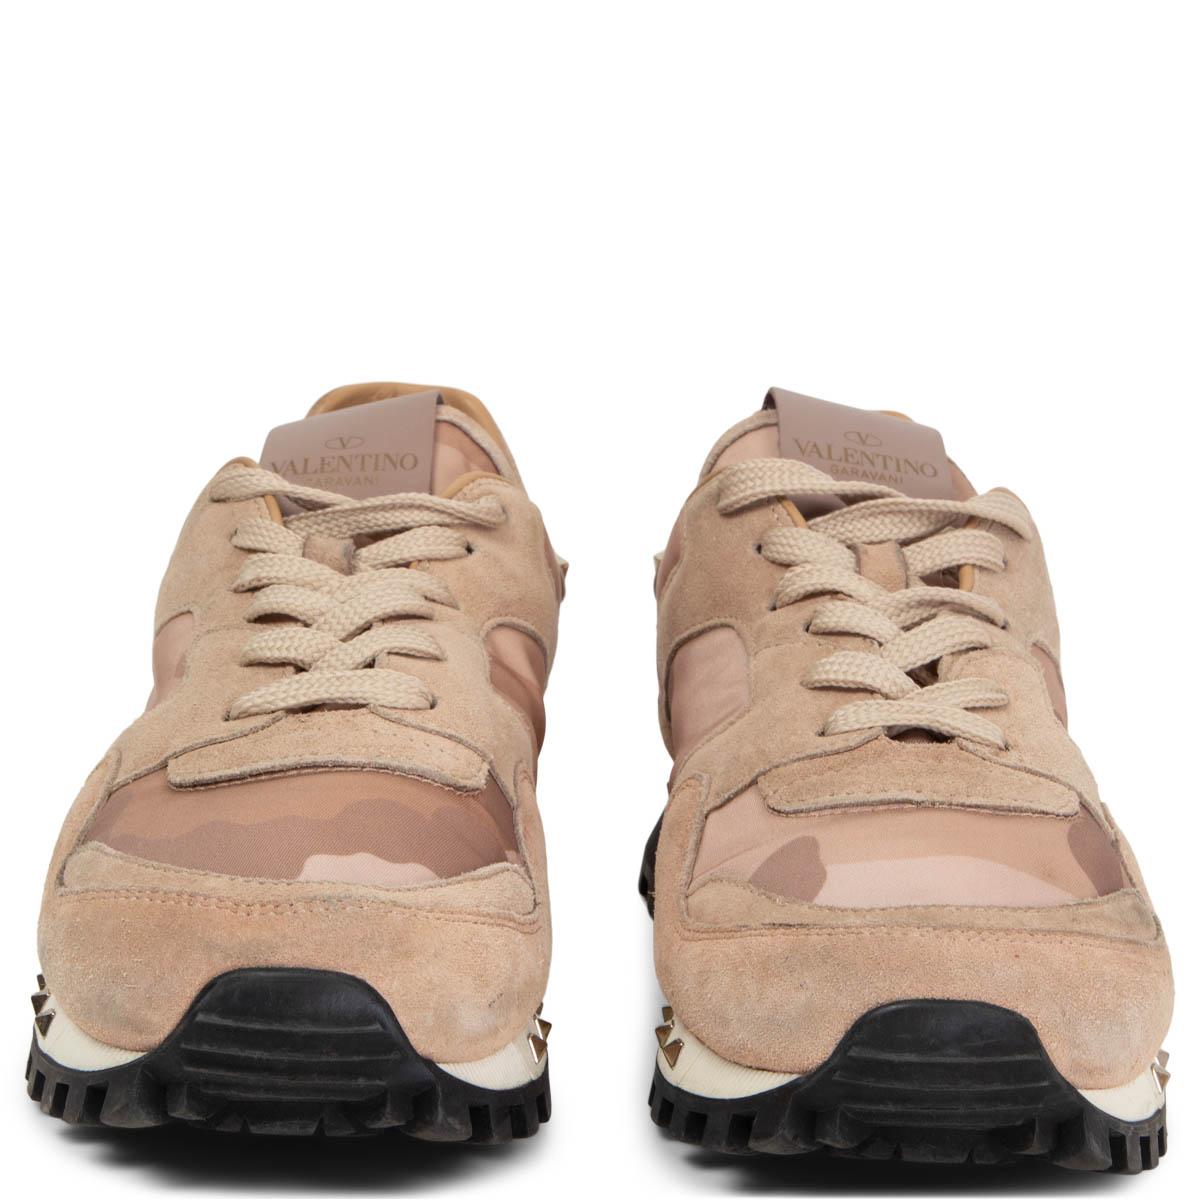 100% authentic Valentino Soul Rockstud sneakers in dusty rose nylon camouflage and suede leather featuring signature Rockstuds along the rubber sole and on the heel. Have been worn with some soft darkening to the front suede parts. Overall in